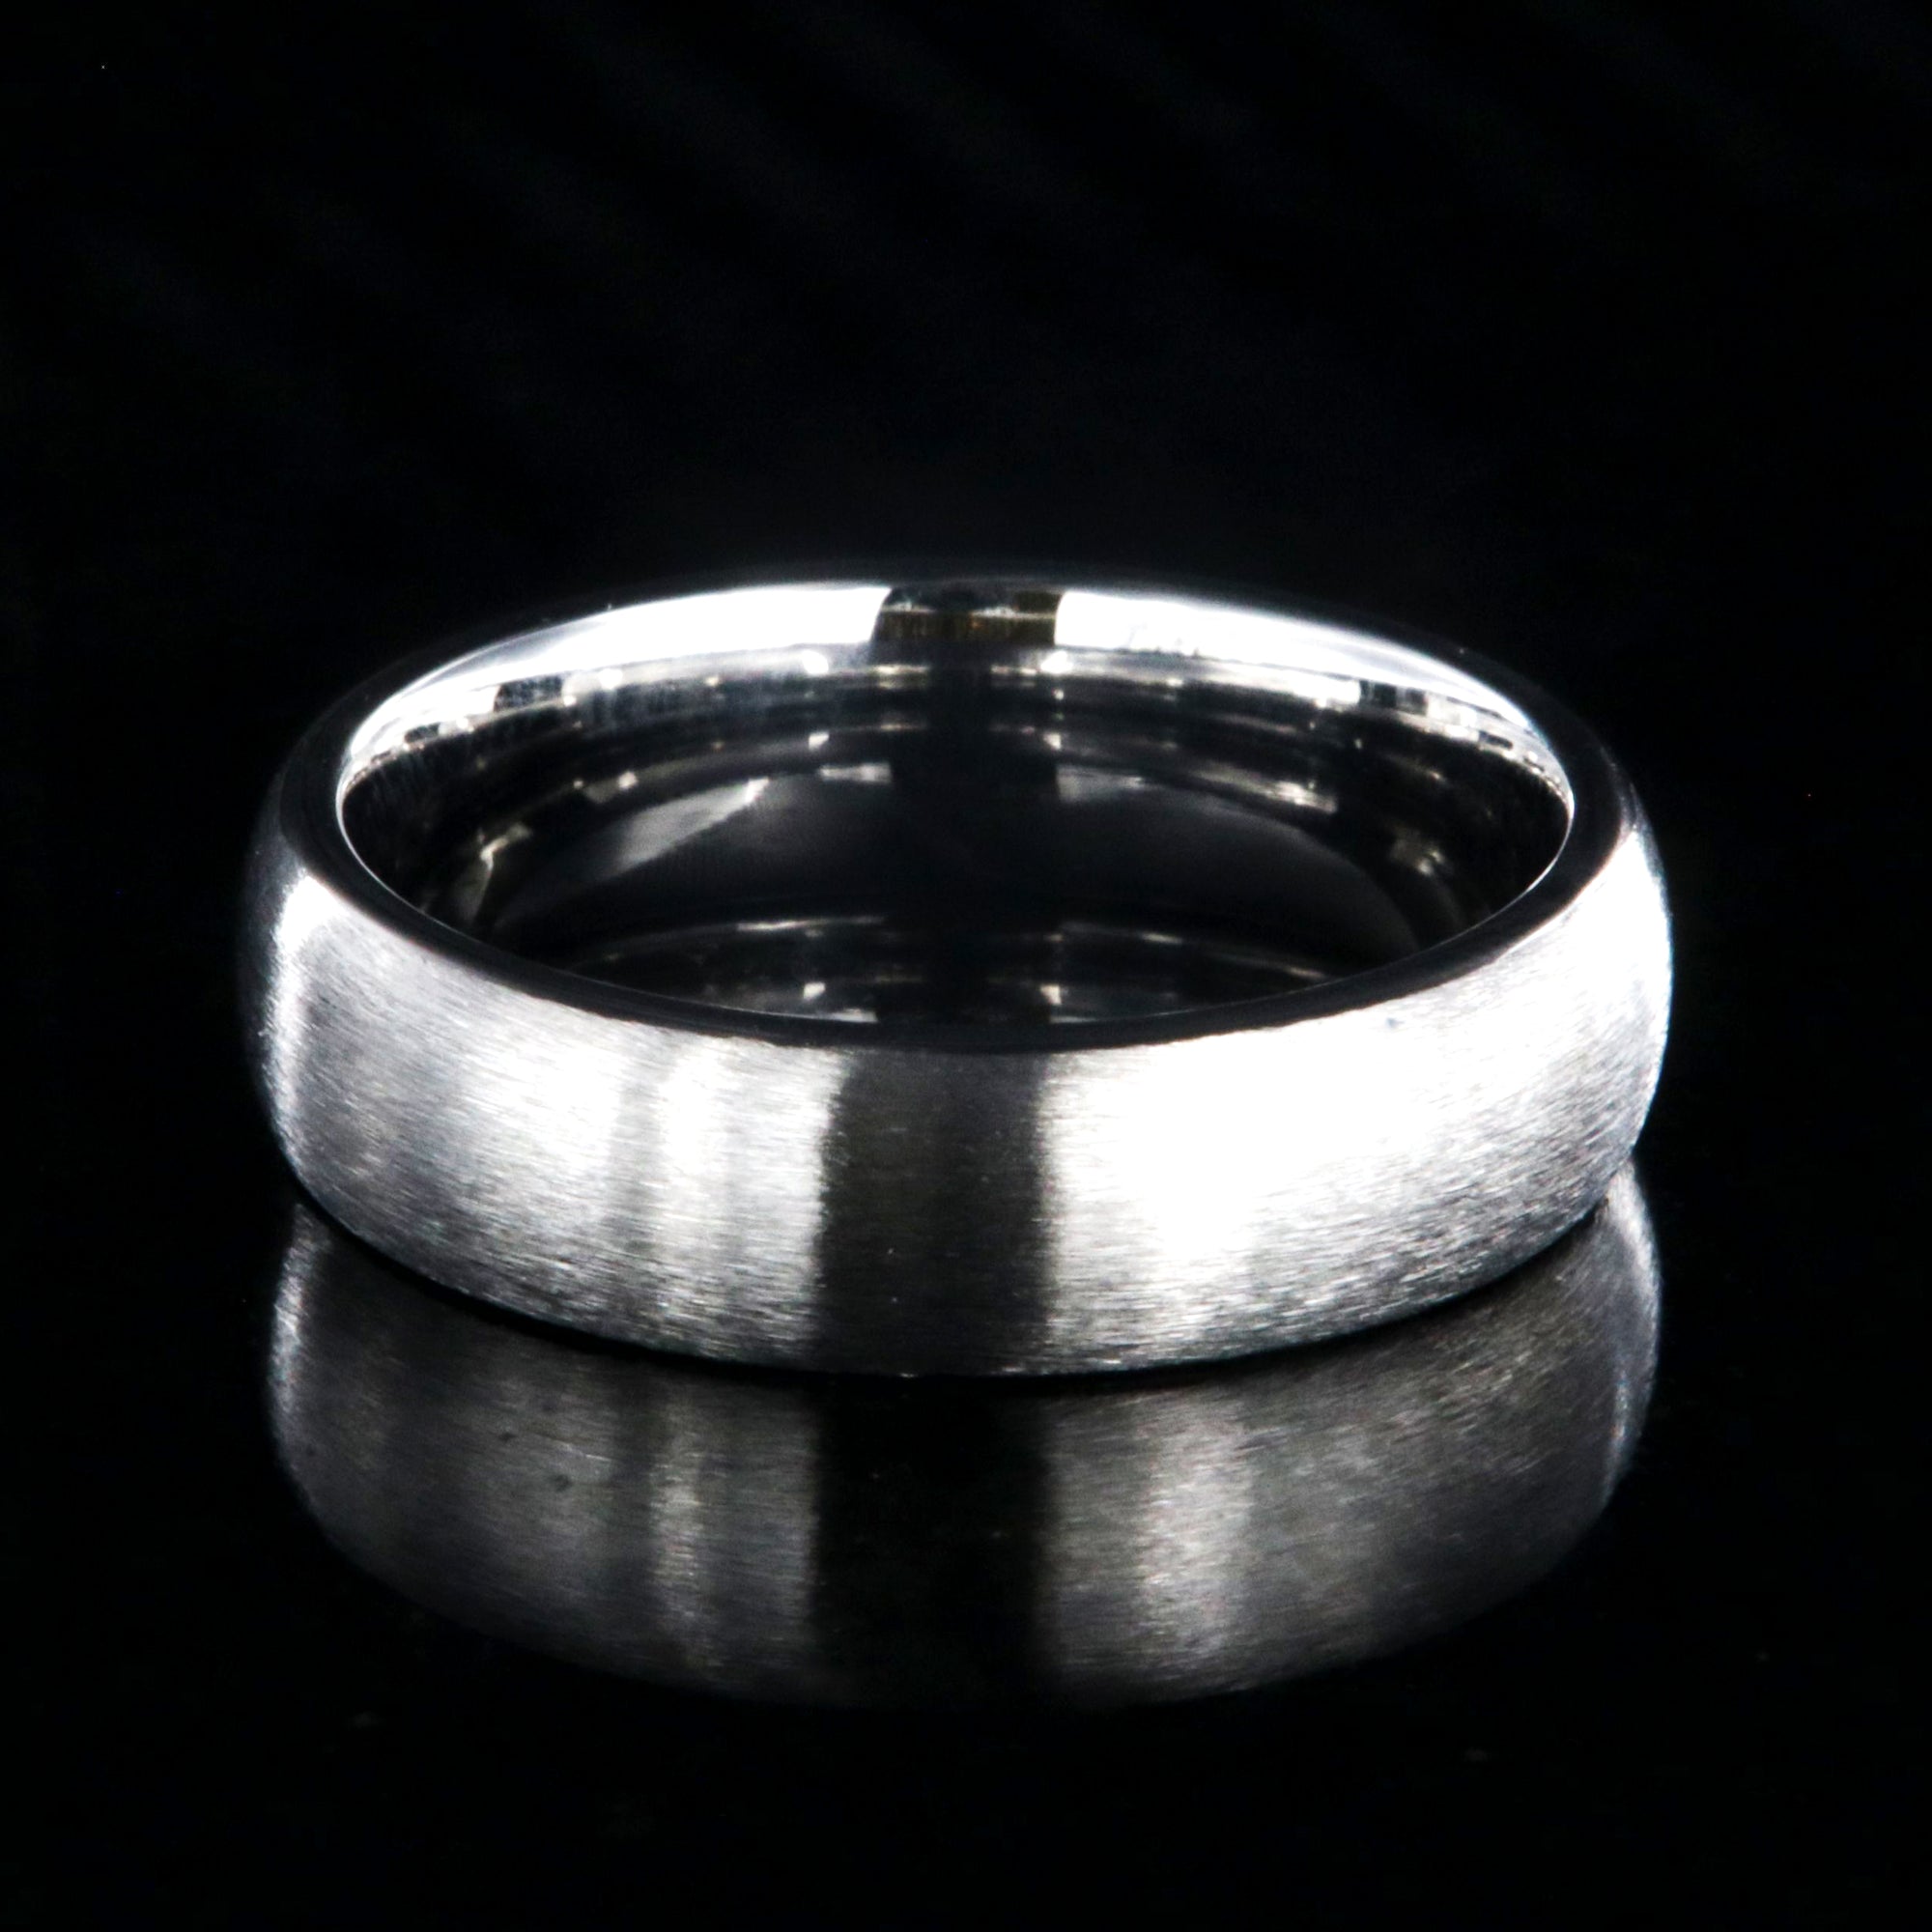 6mm wide cobalt ring with a brushed finish and rounded profile